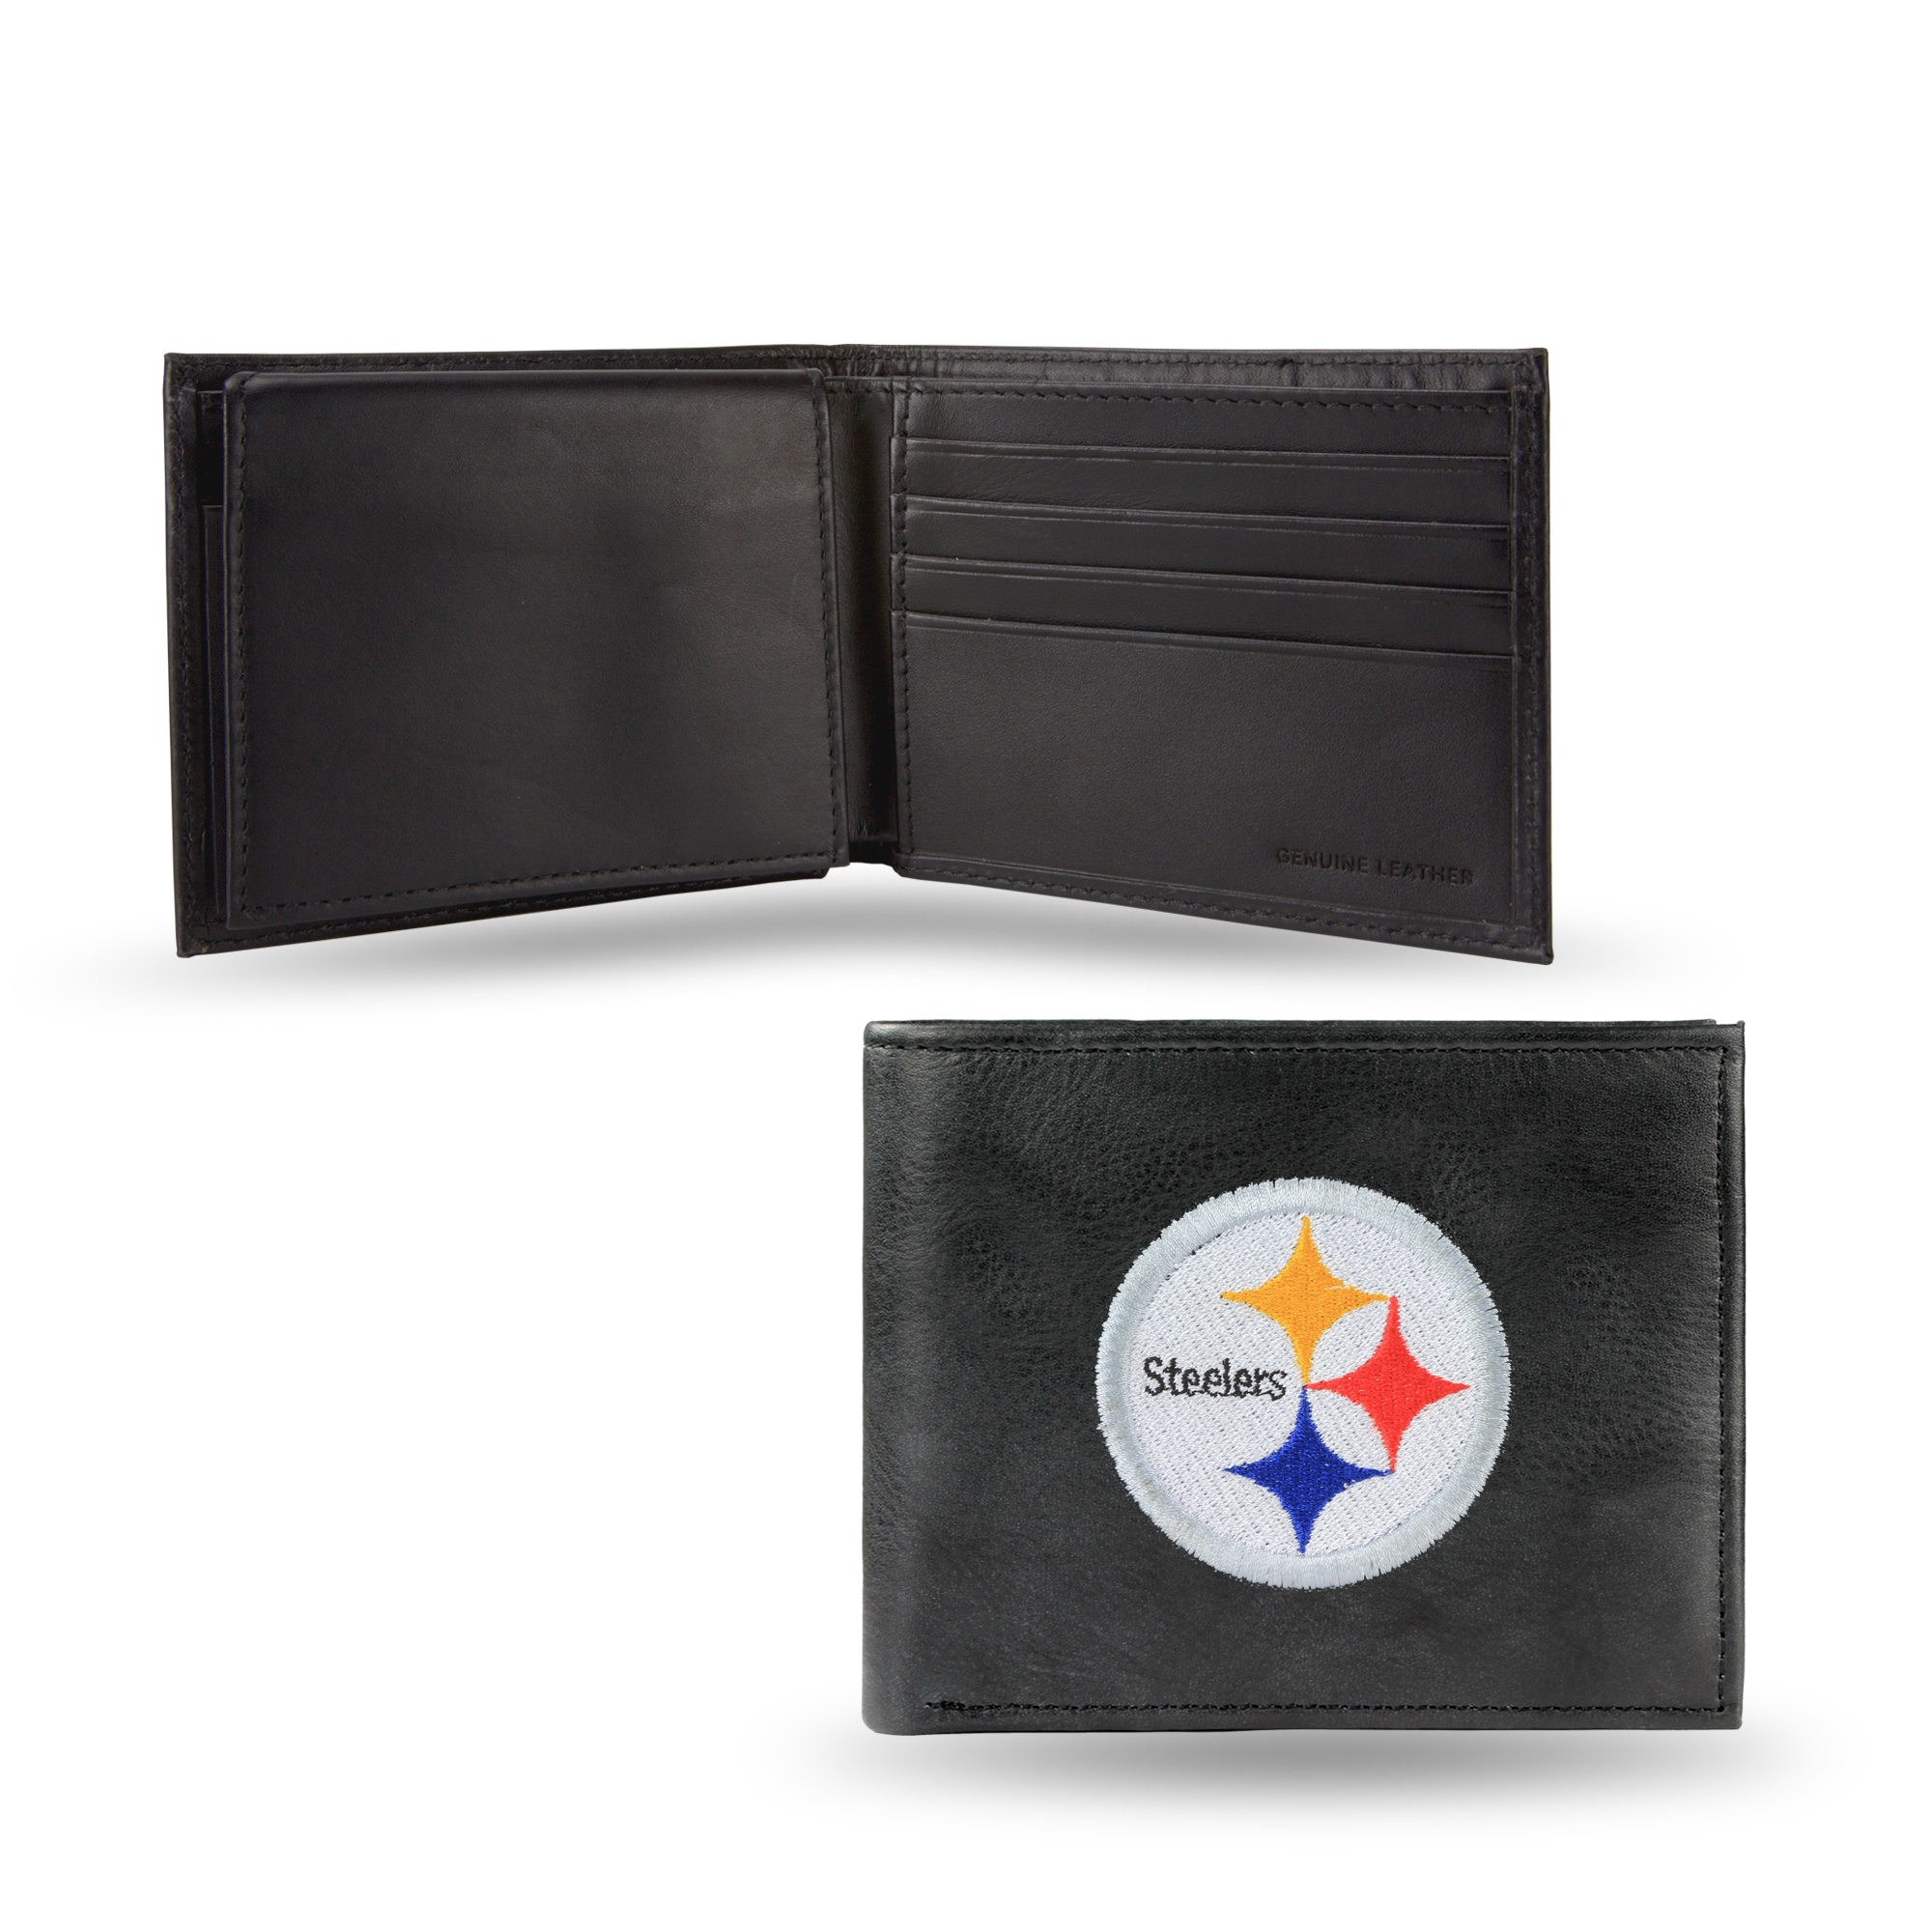 Rico Pittsburgh Steelers Embroidered Bi-fold Wallet